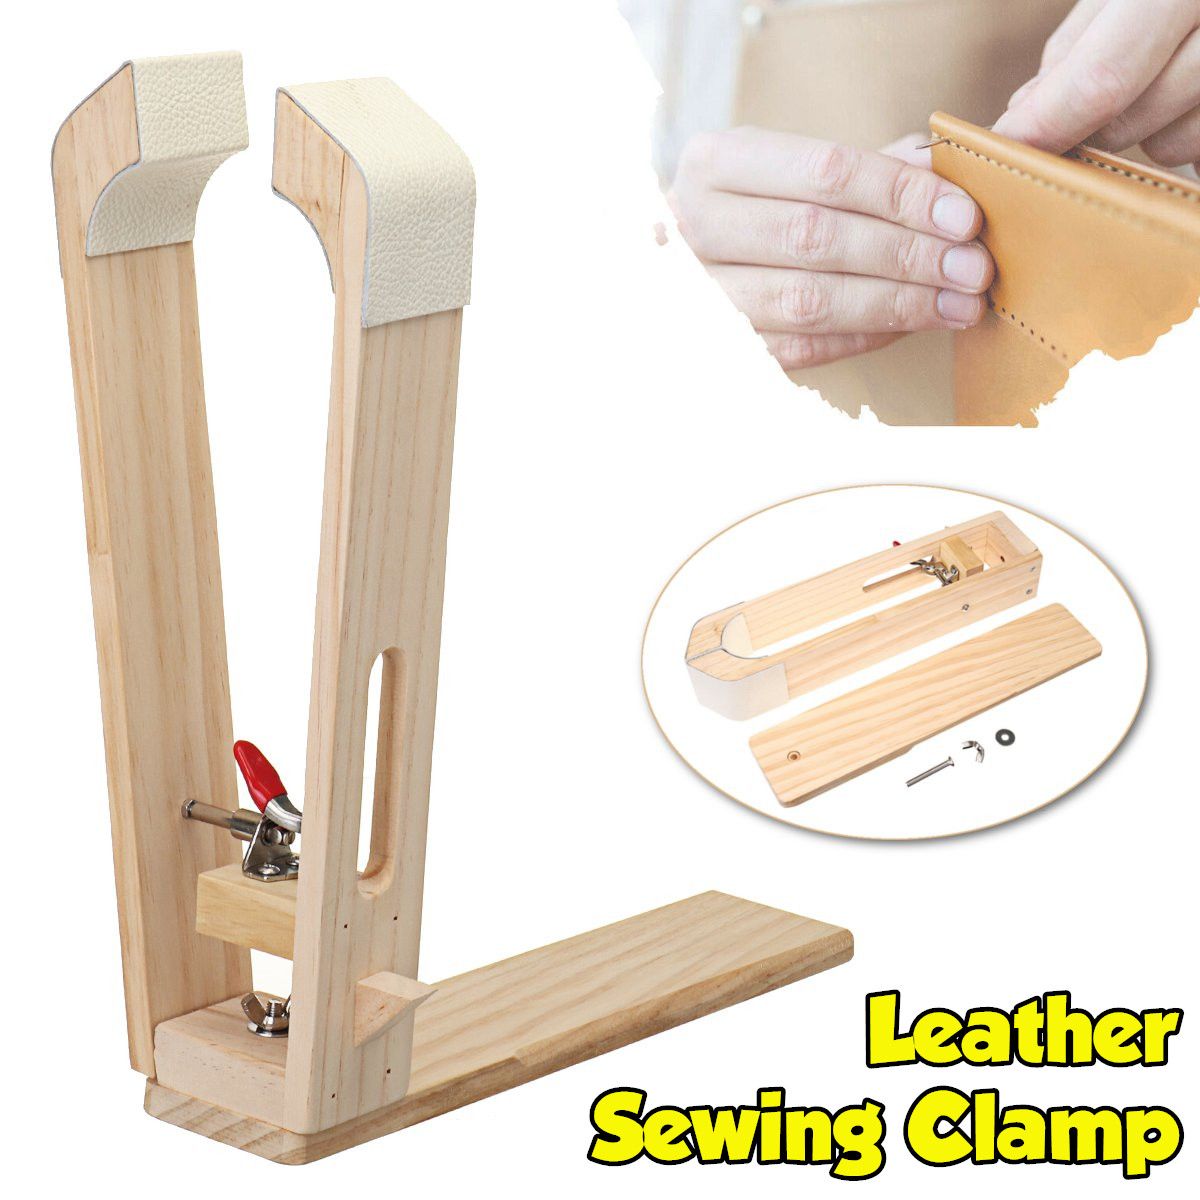 Household-Leather-Craft-Stitching-Lacing-Sewing-Clamp-Wooden-Table-Desktop-Tools-1742095